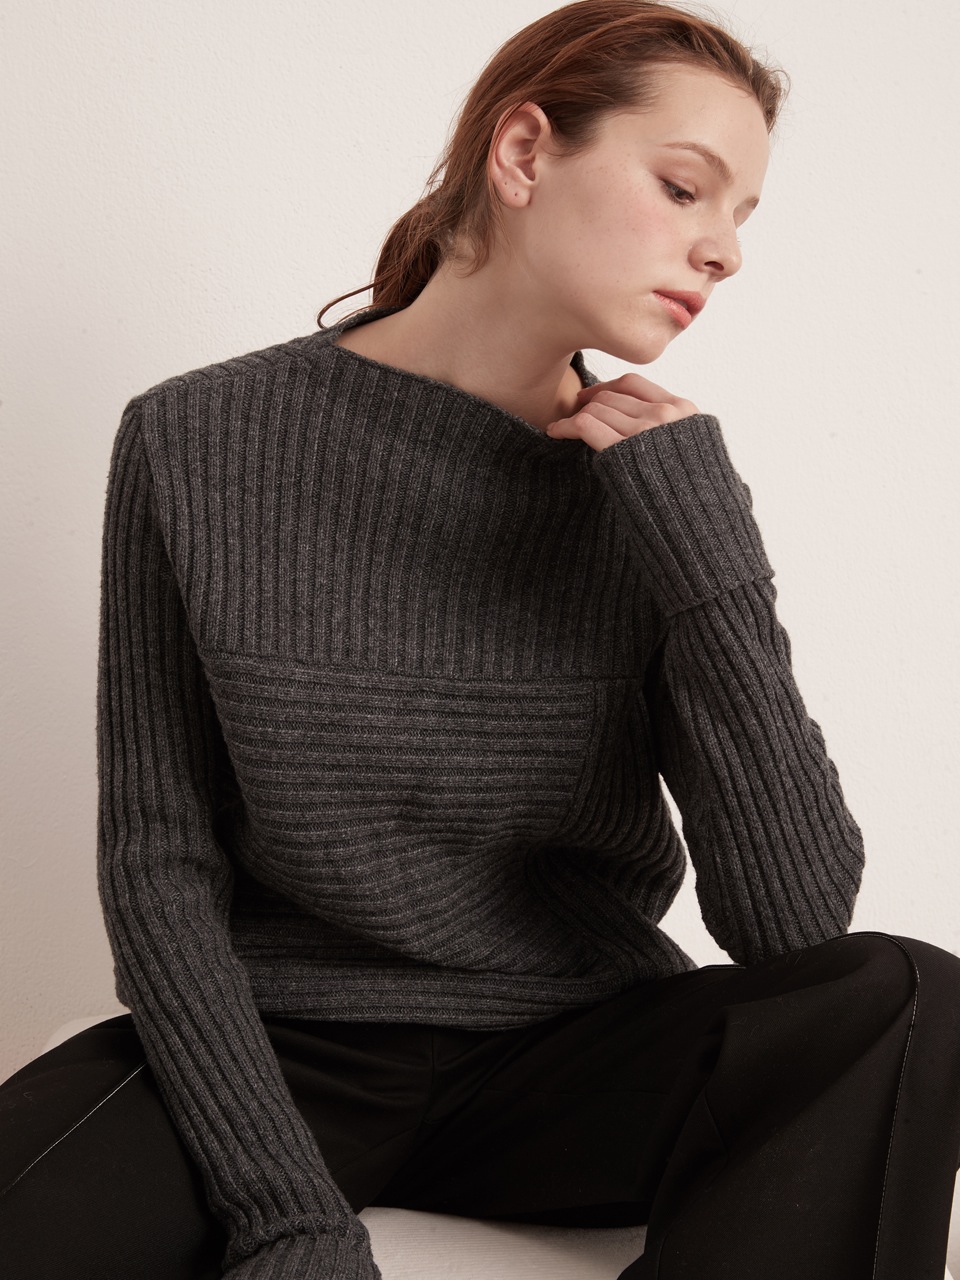 Incision Cashmere Knitwear-Charcoal